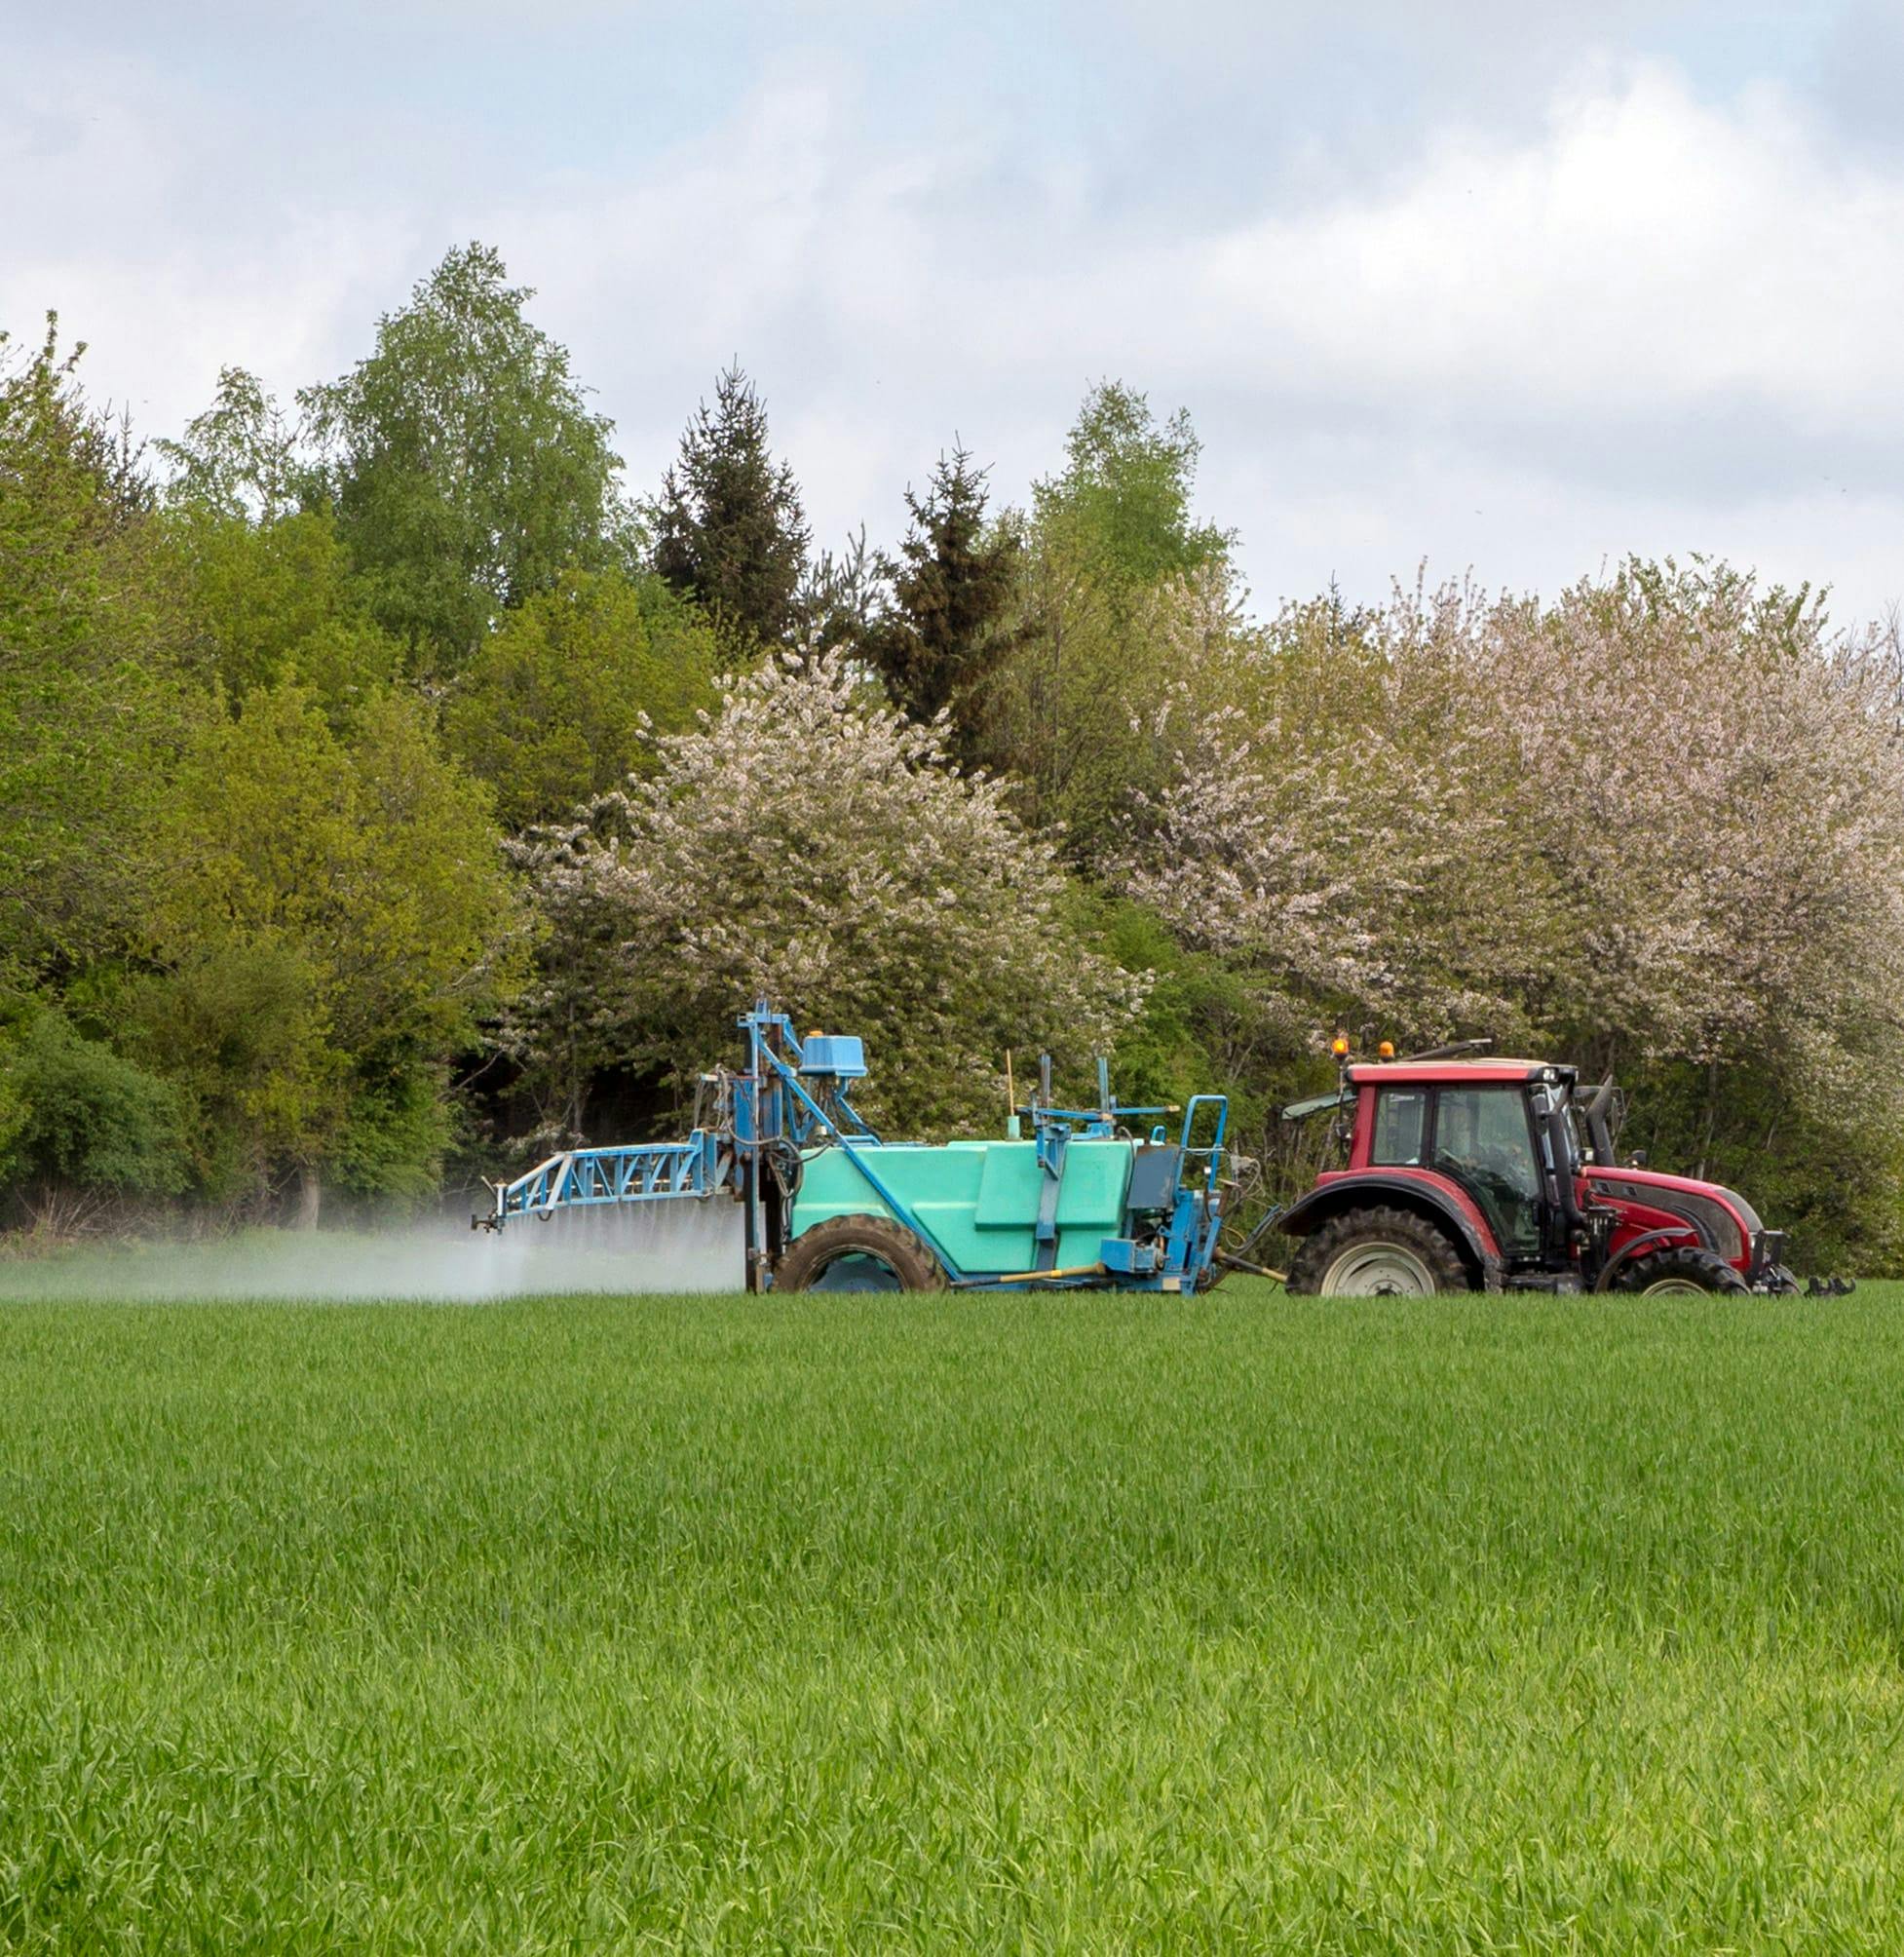 Field being sprayed with chemicals